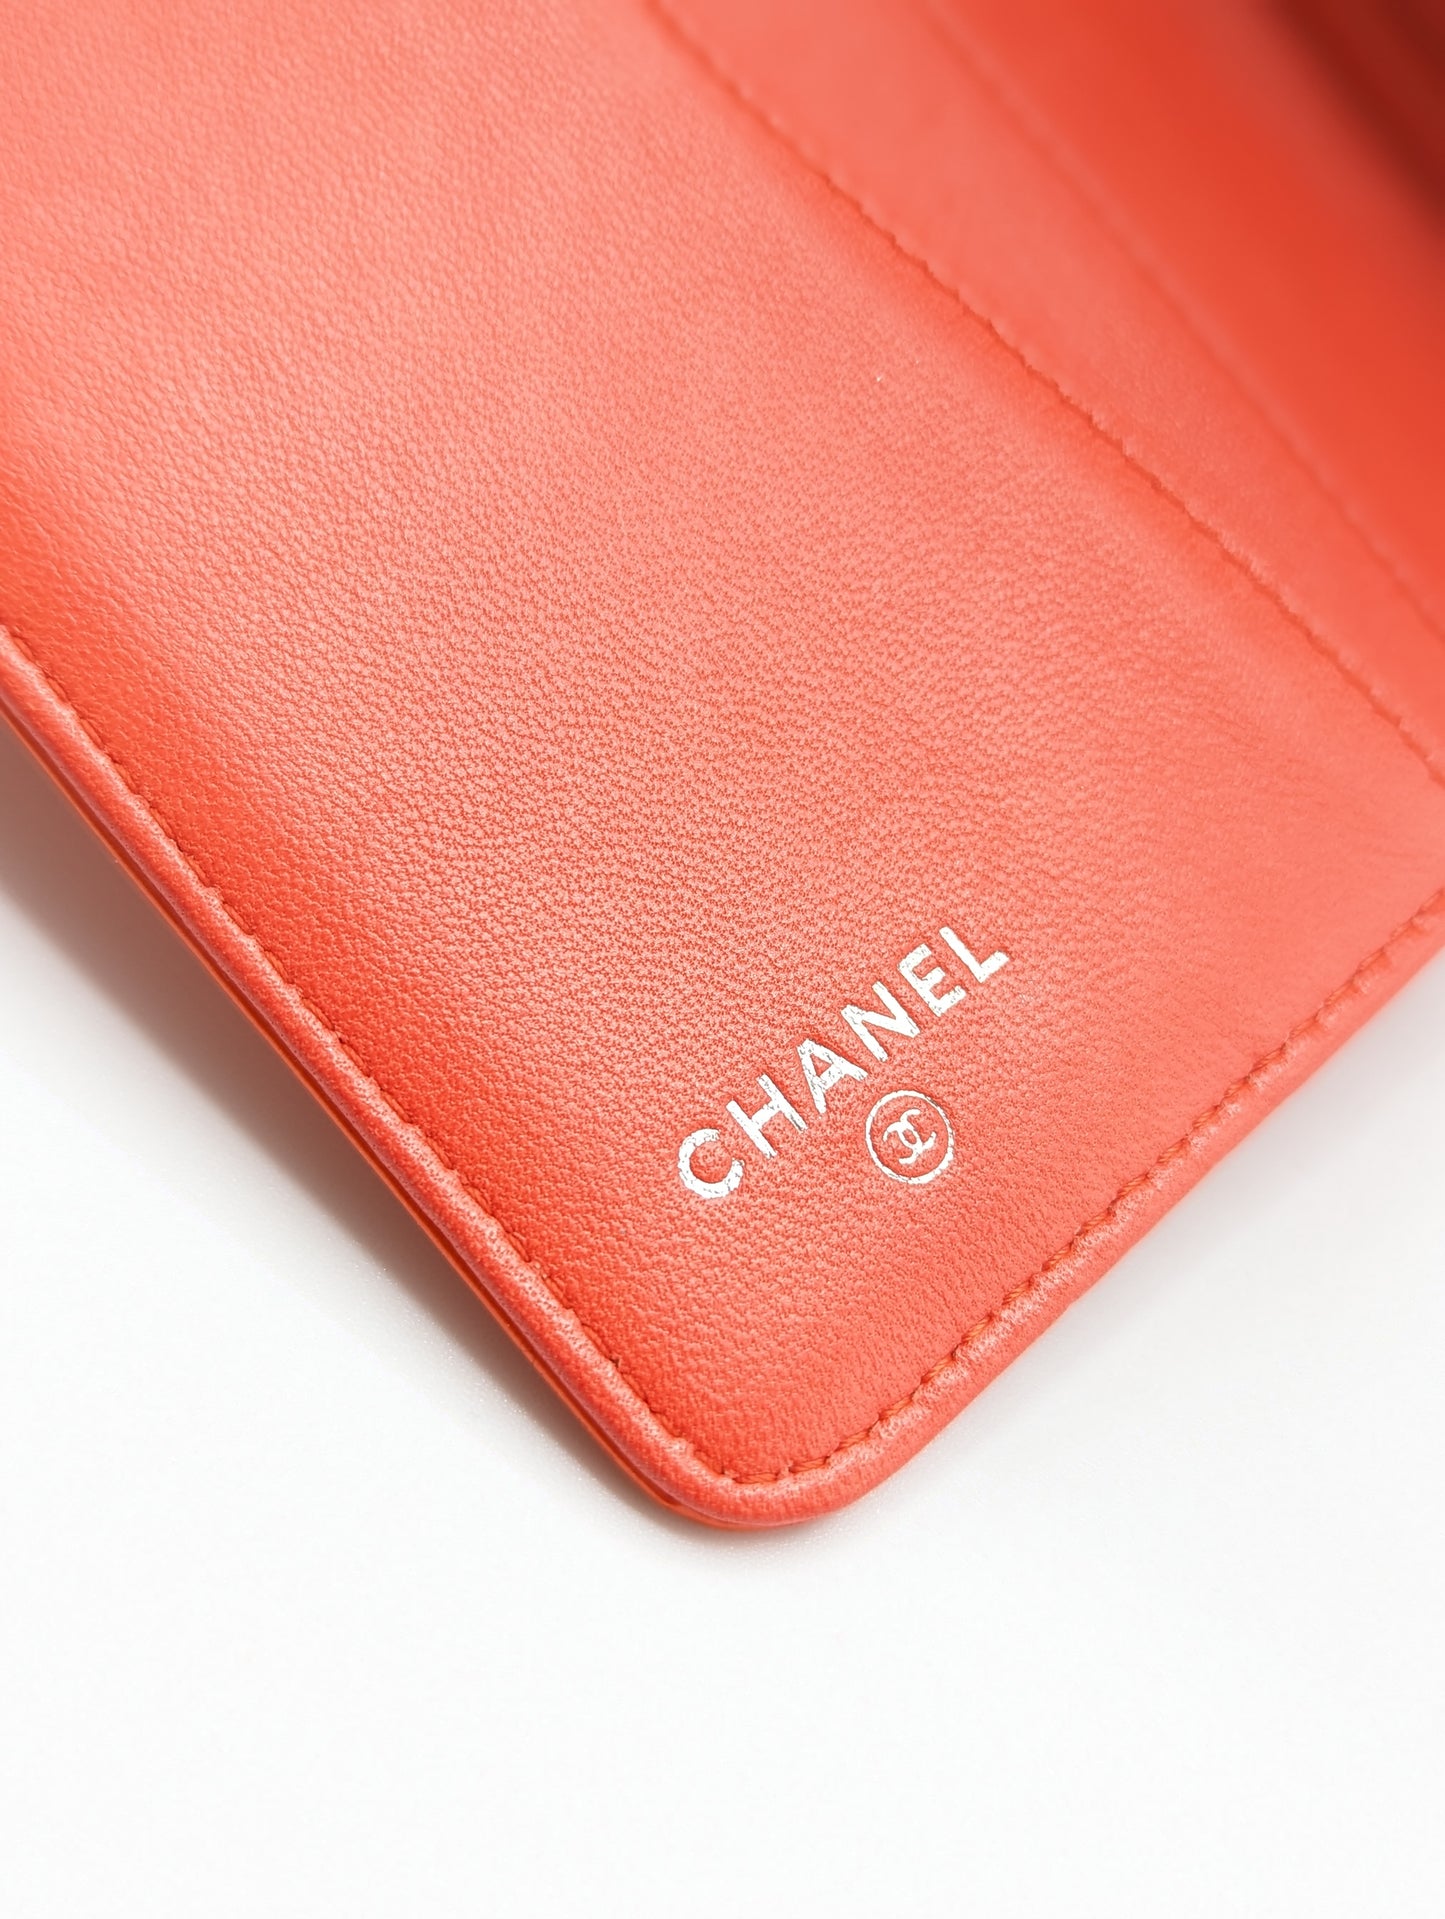 Chanel Coral Patent Charm Passport Wallet